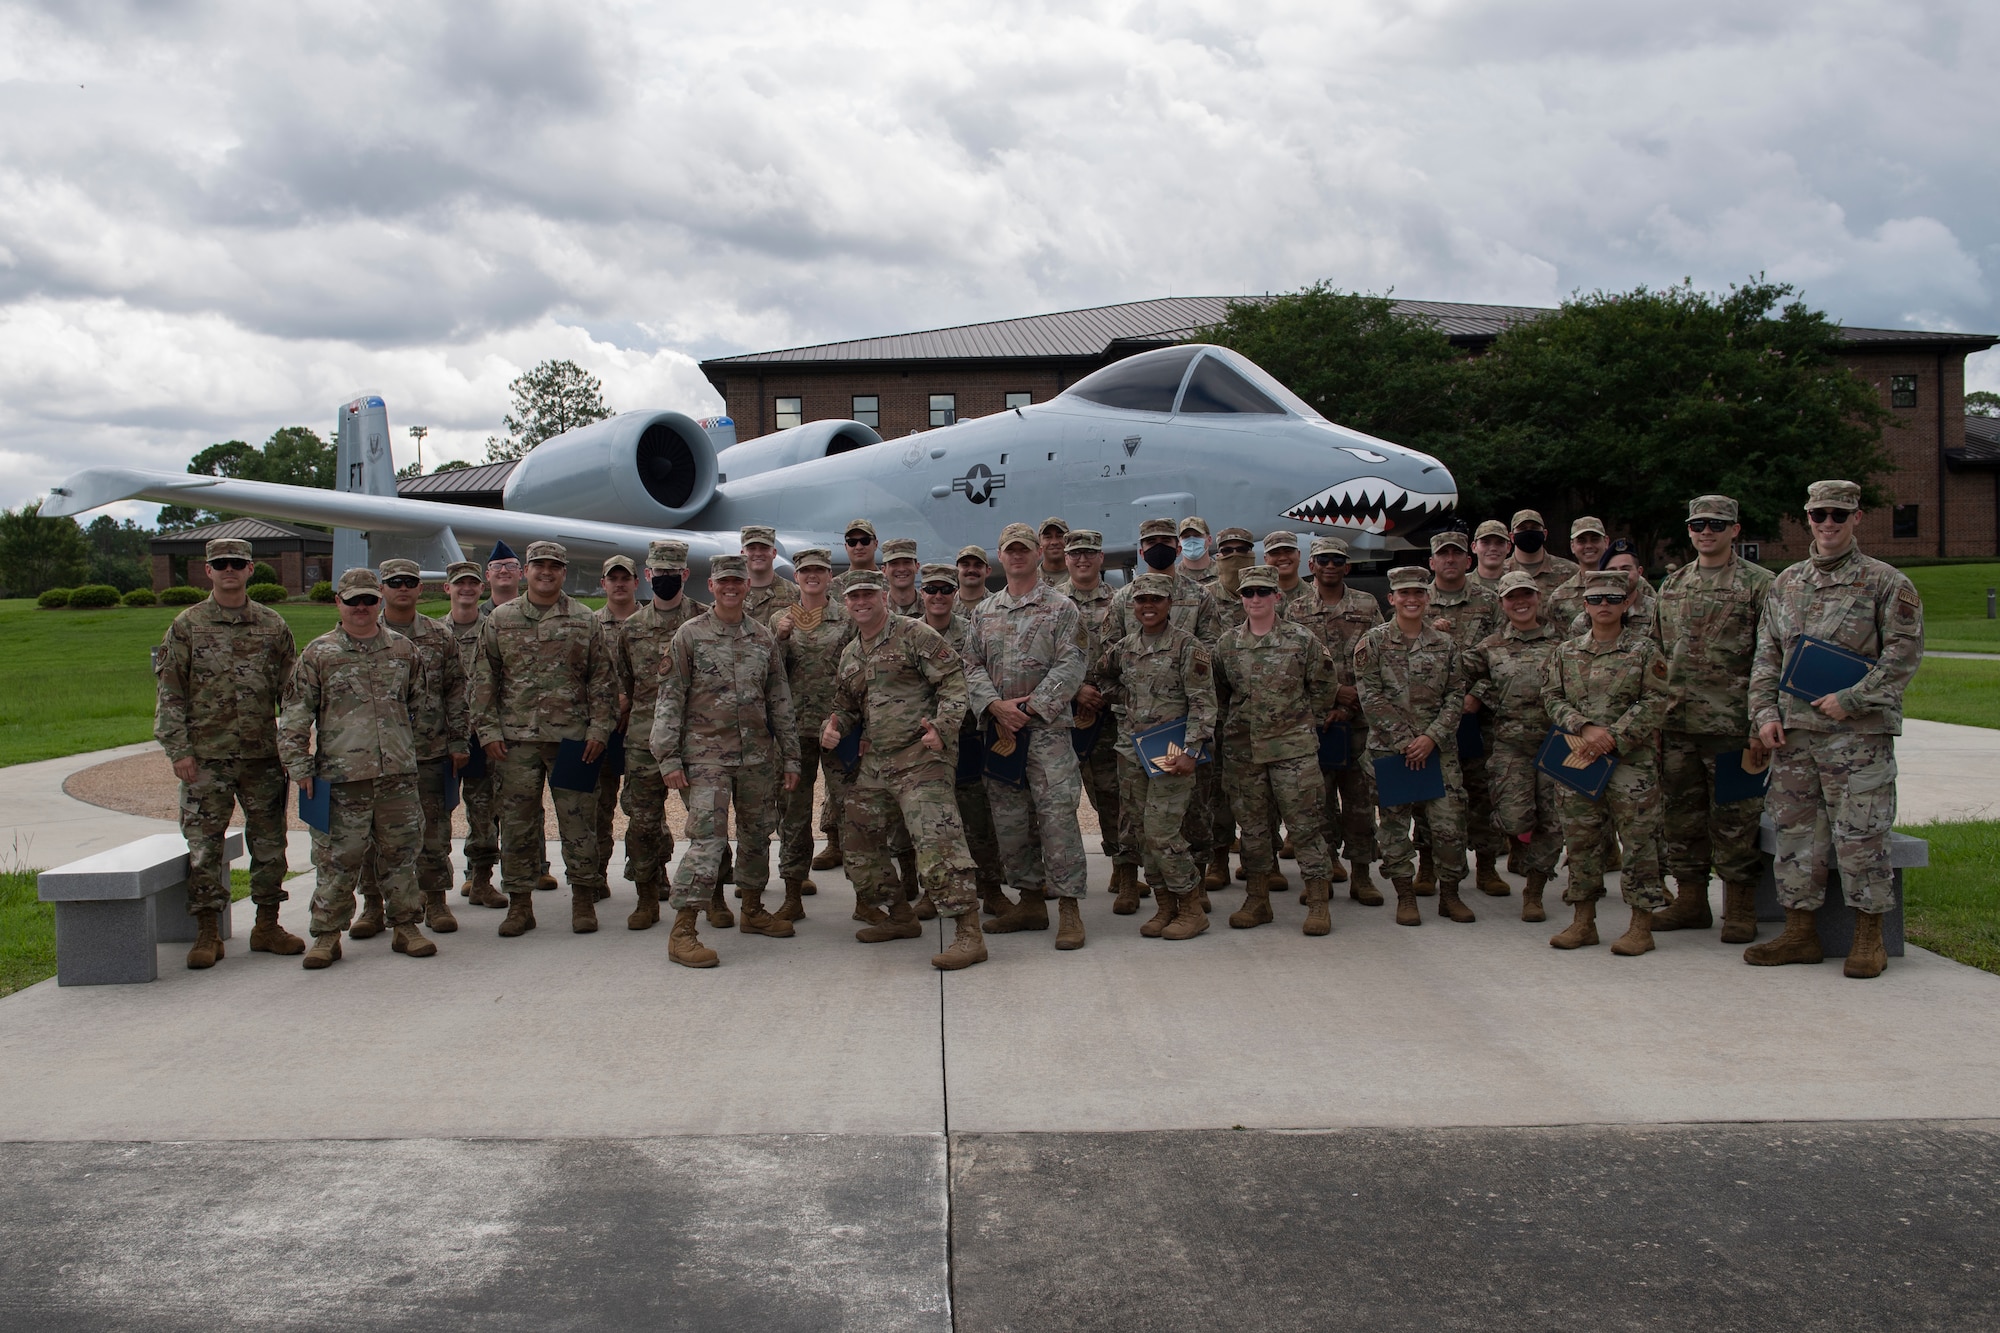 A photo of a group of 40 people standing in front on an A-10C Thunderbolt II aircraft.